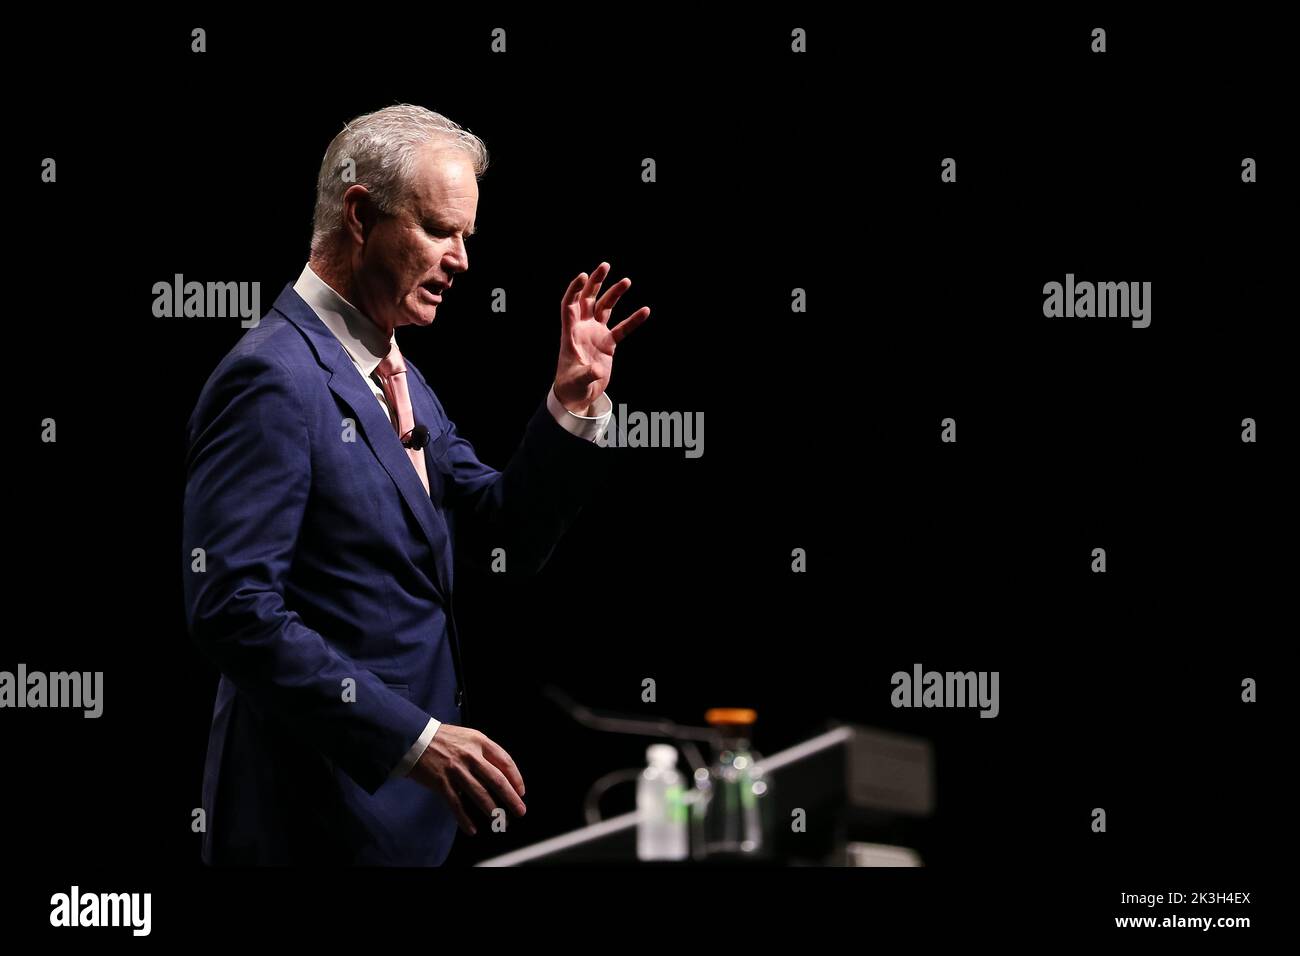 Melbourne, Australia, 26 September, 2022. Well known commentator Ross Cameron opens the night during An Evening With Nigel Farage at The Melbourne Convention and Exhibition Centre on September 26, 2022 in Melbourne, Australia. Credit: Dave Hewison/Speed Media/Alamy Live News Stock Photo